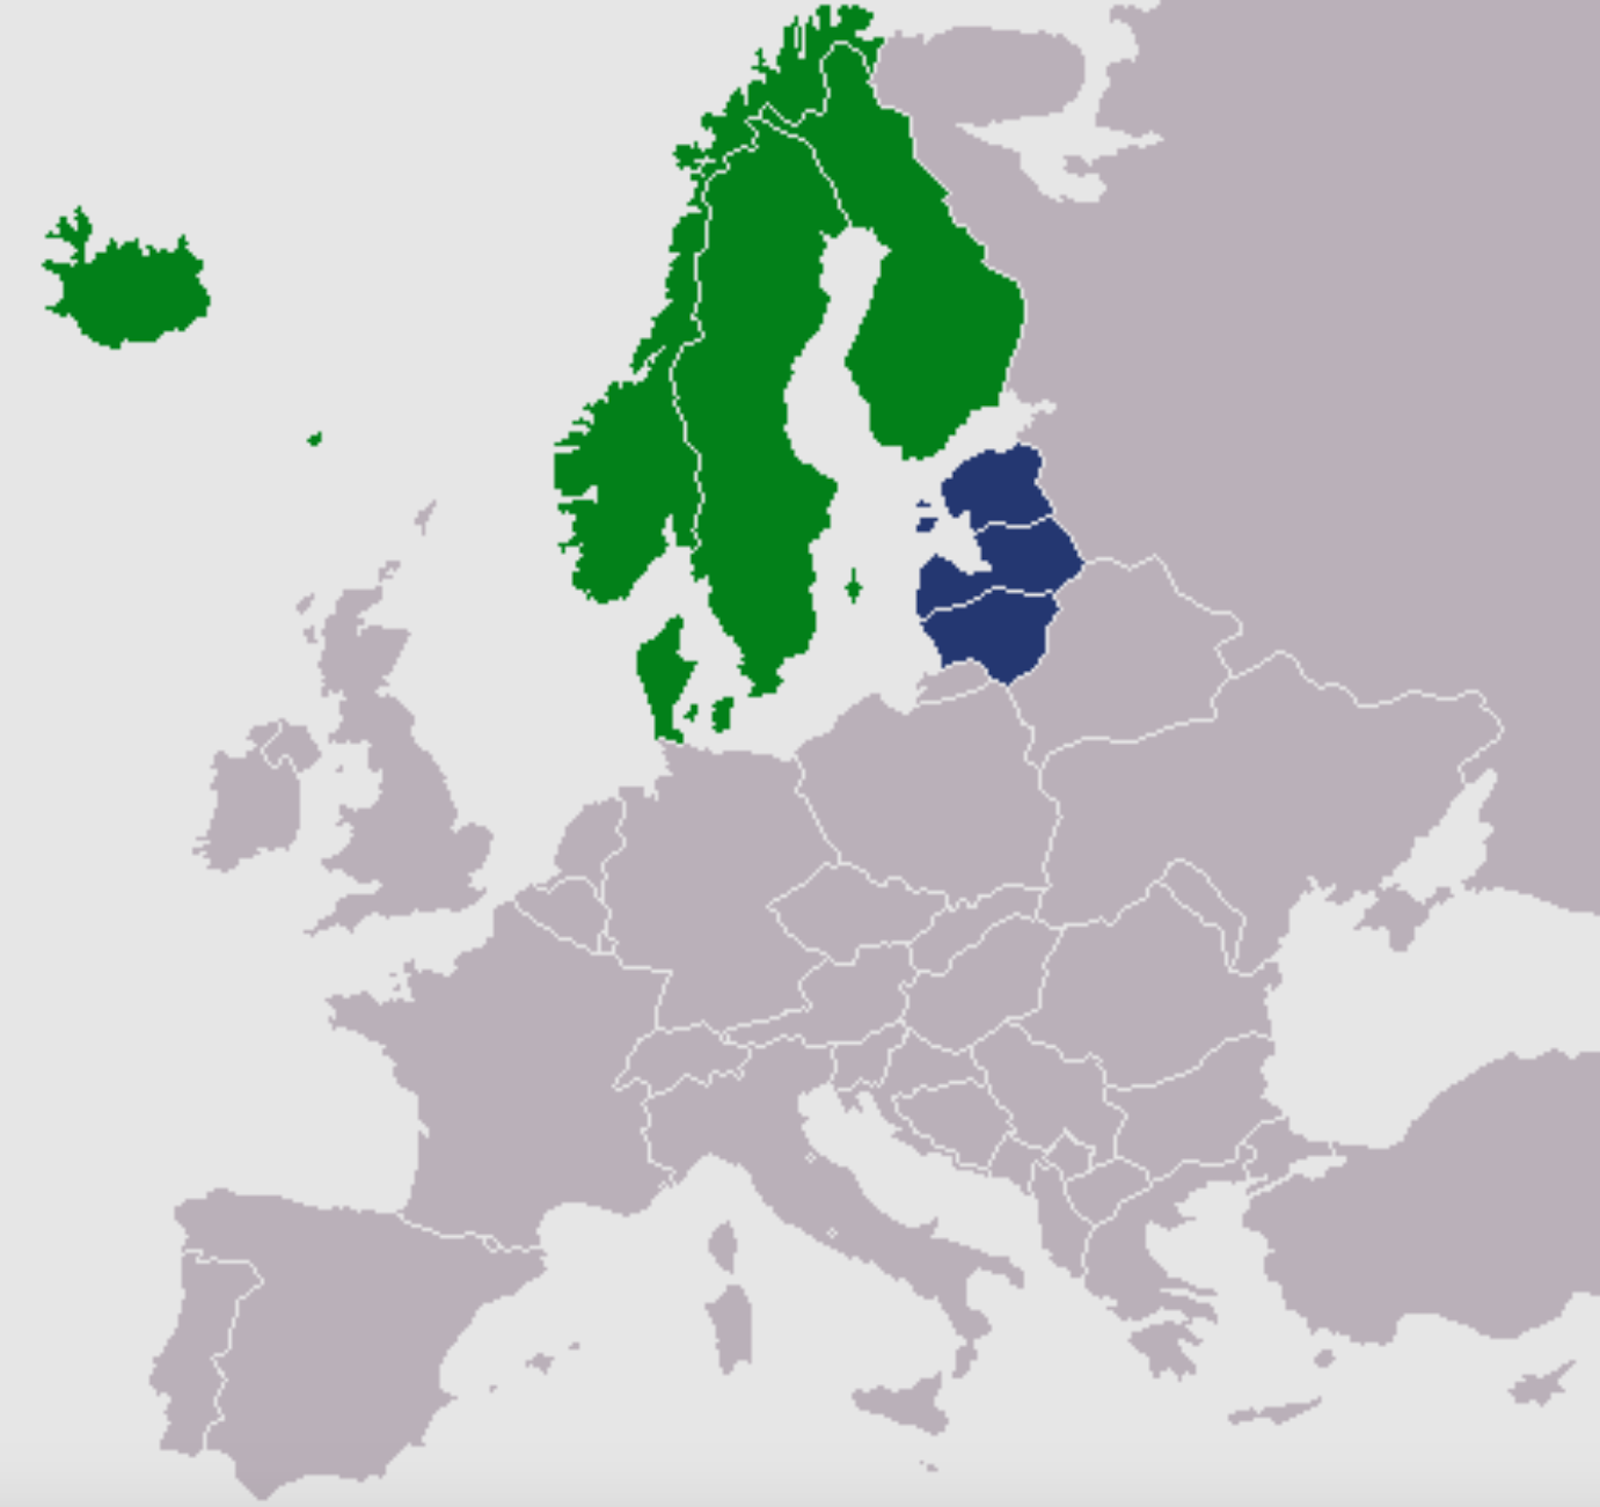 Map highlighting Northern Europe; Scandinavian countries (Norway, Sweden, Finland, and Iceland) are in green, and the Baltic States (Estonia, Latvia, Lithuania) are in dark blue.